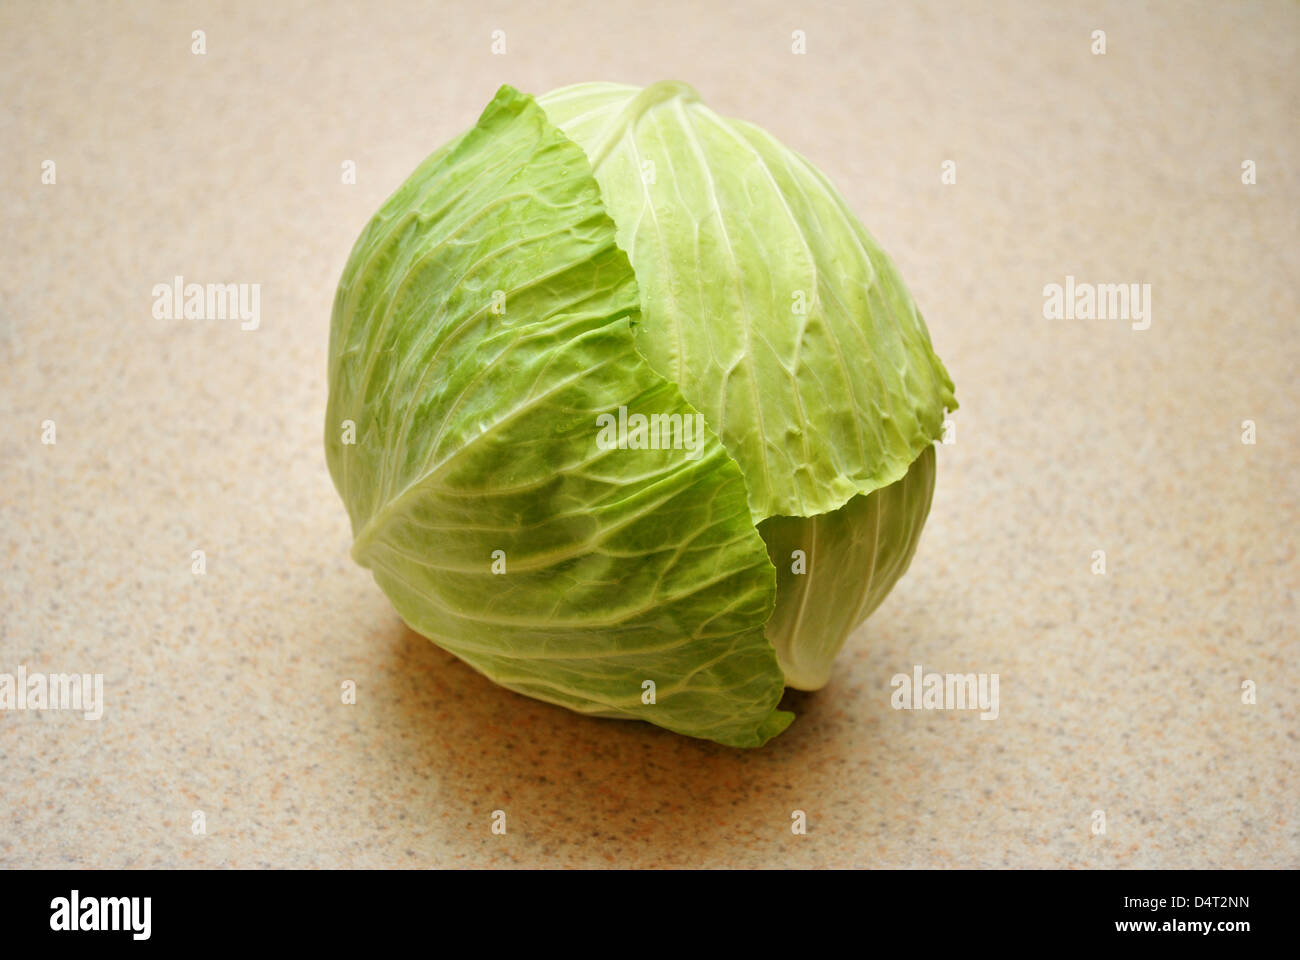 A Head of Green Cabbage Stock Photo